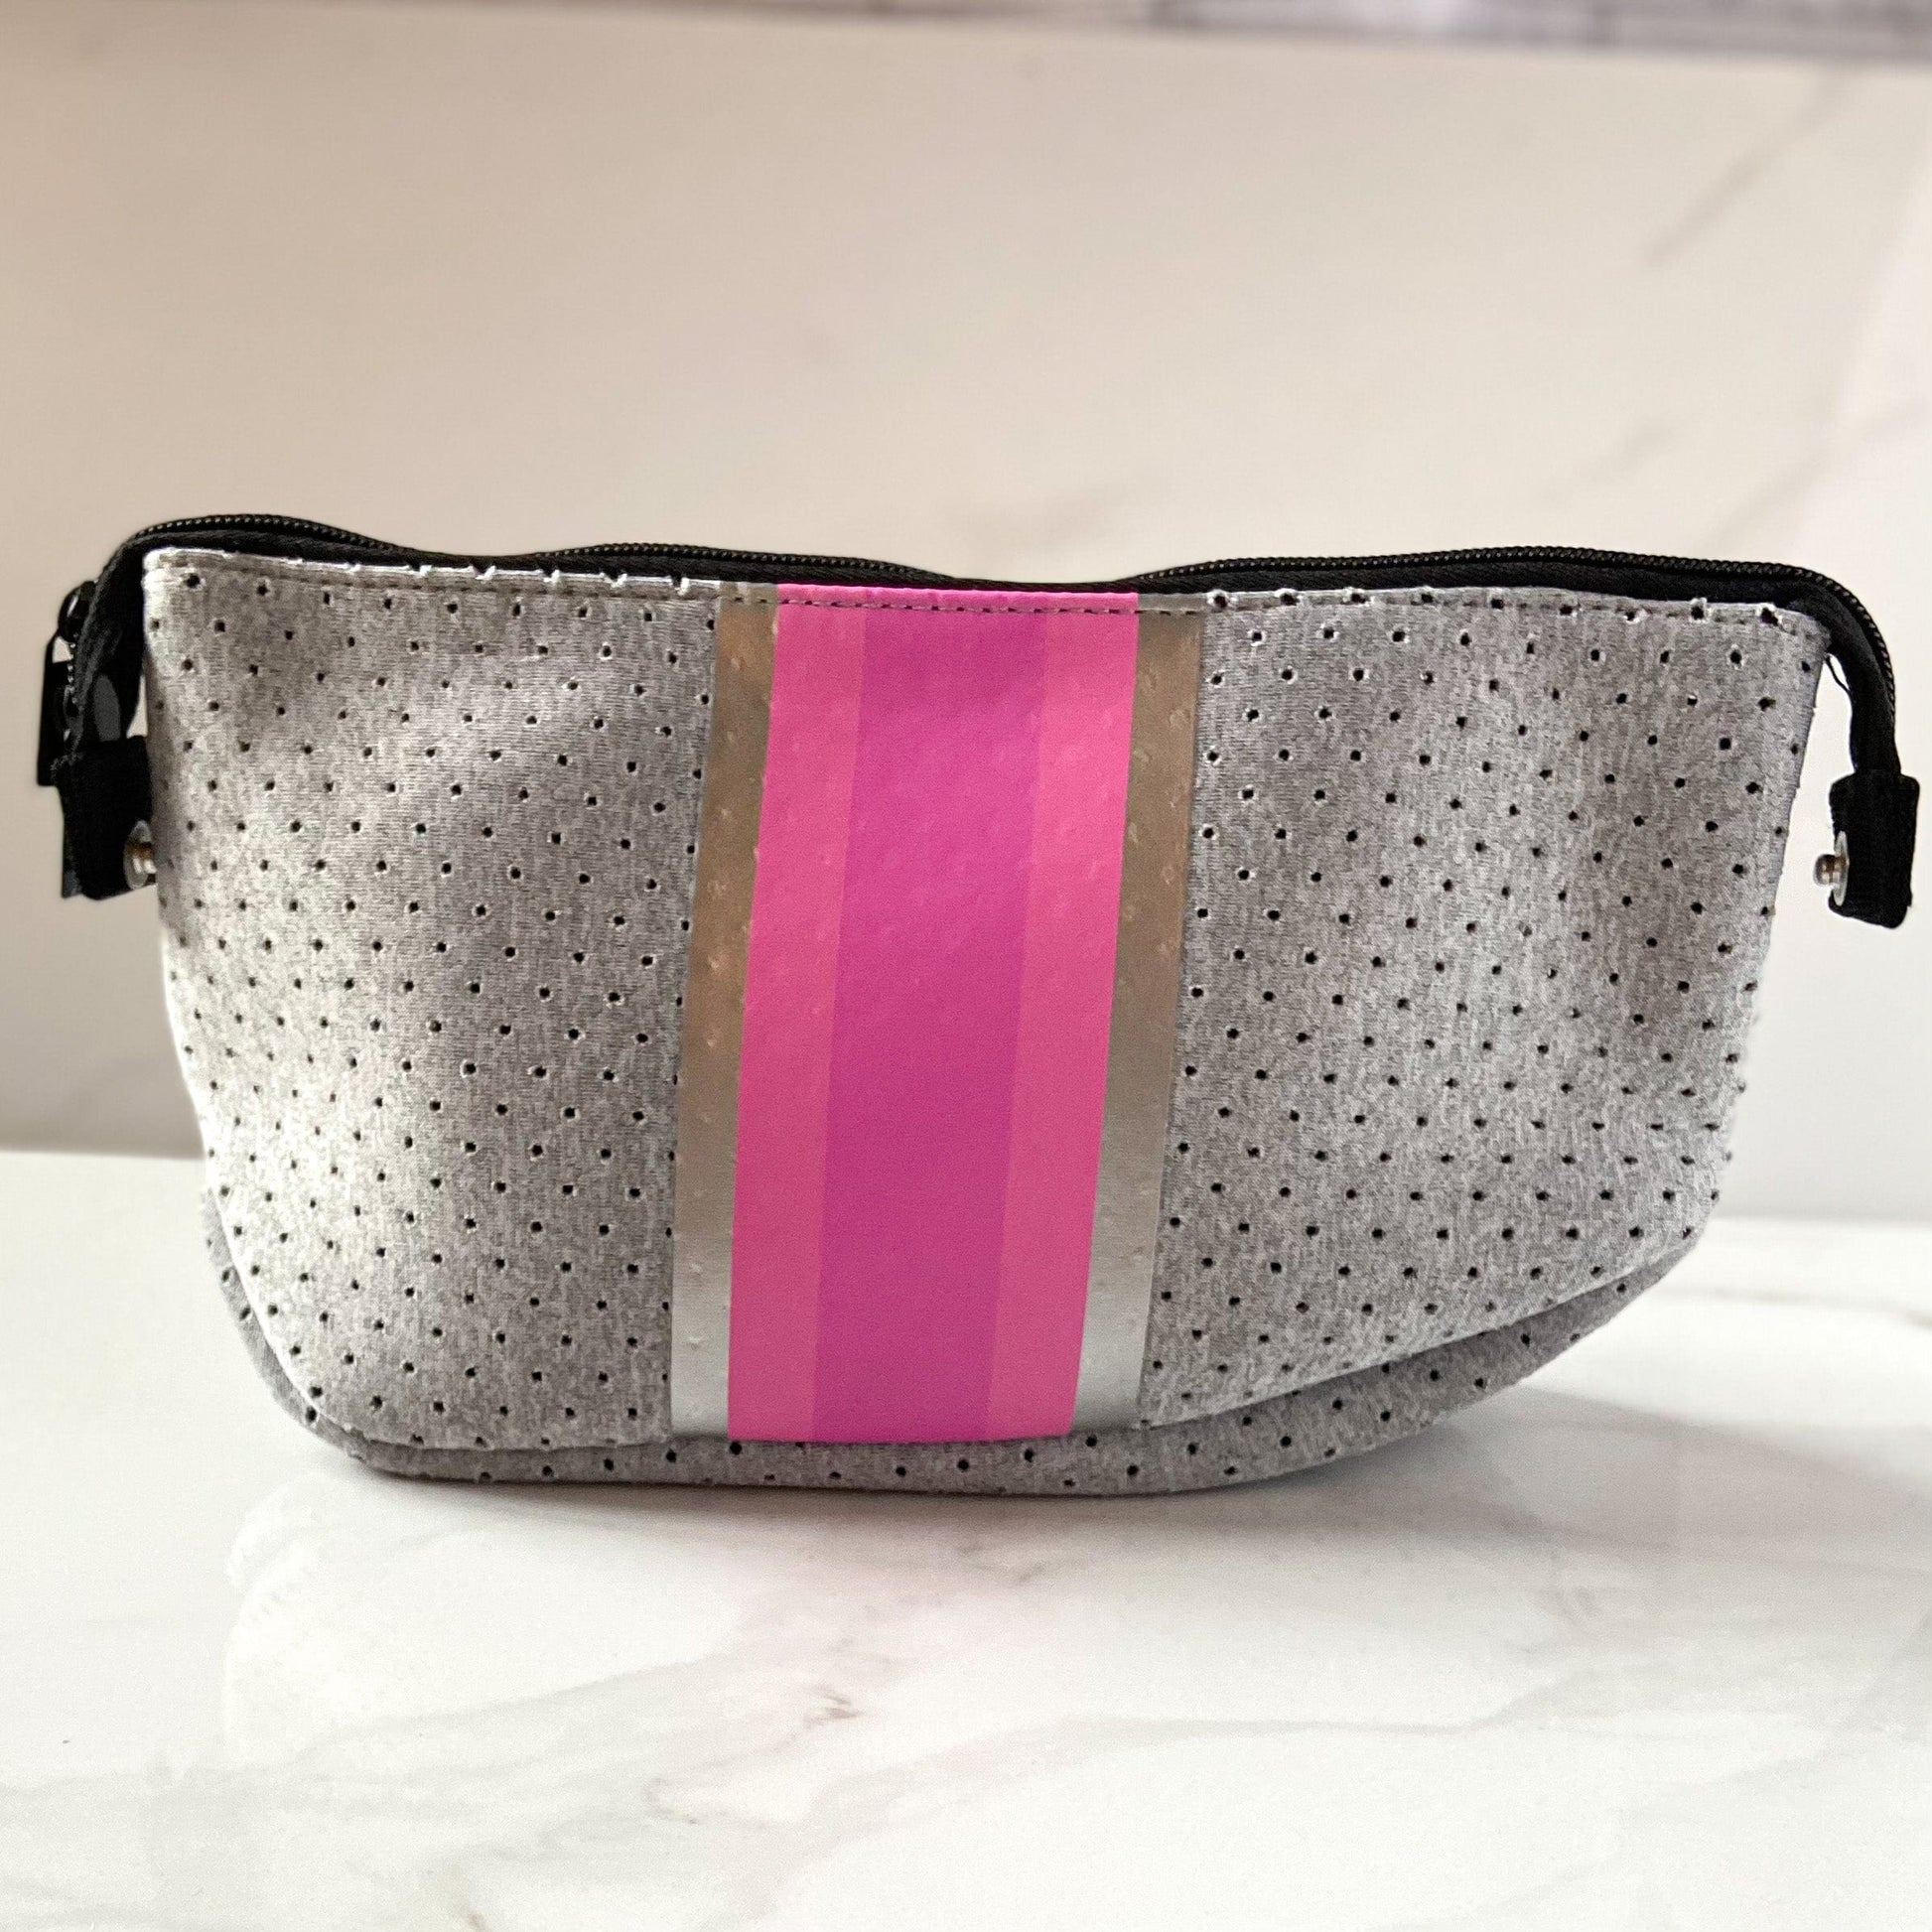 Neoprene makeup bag in gray with pink stripe and zipper top closure